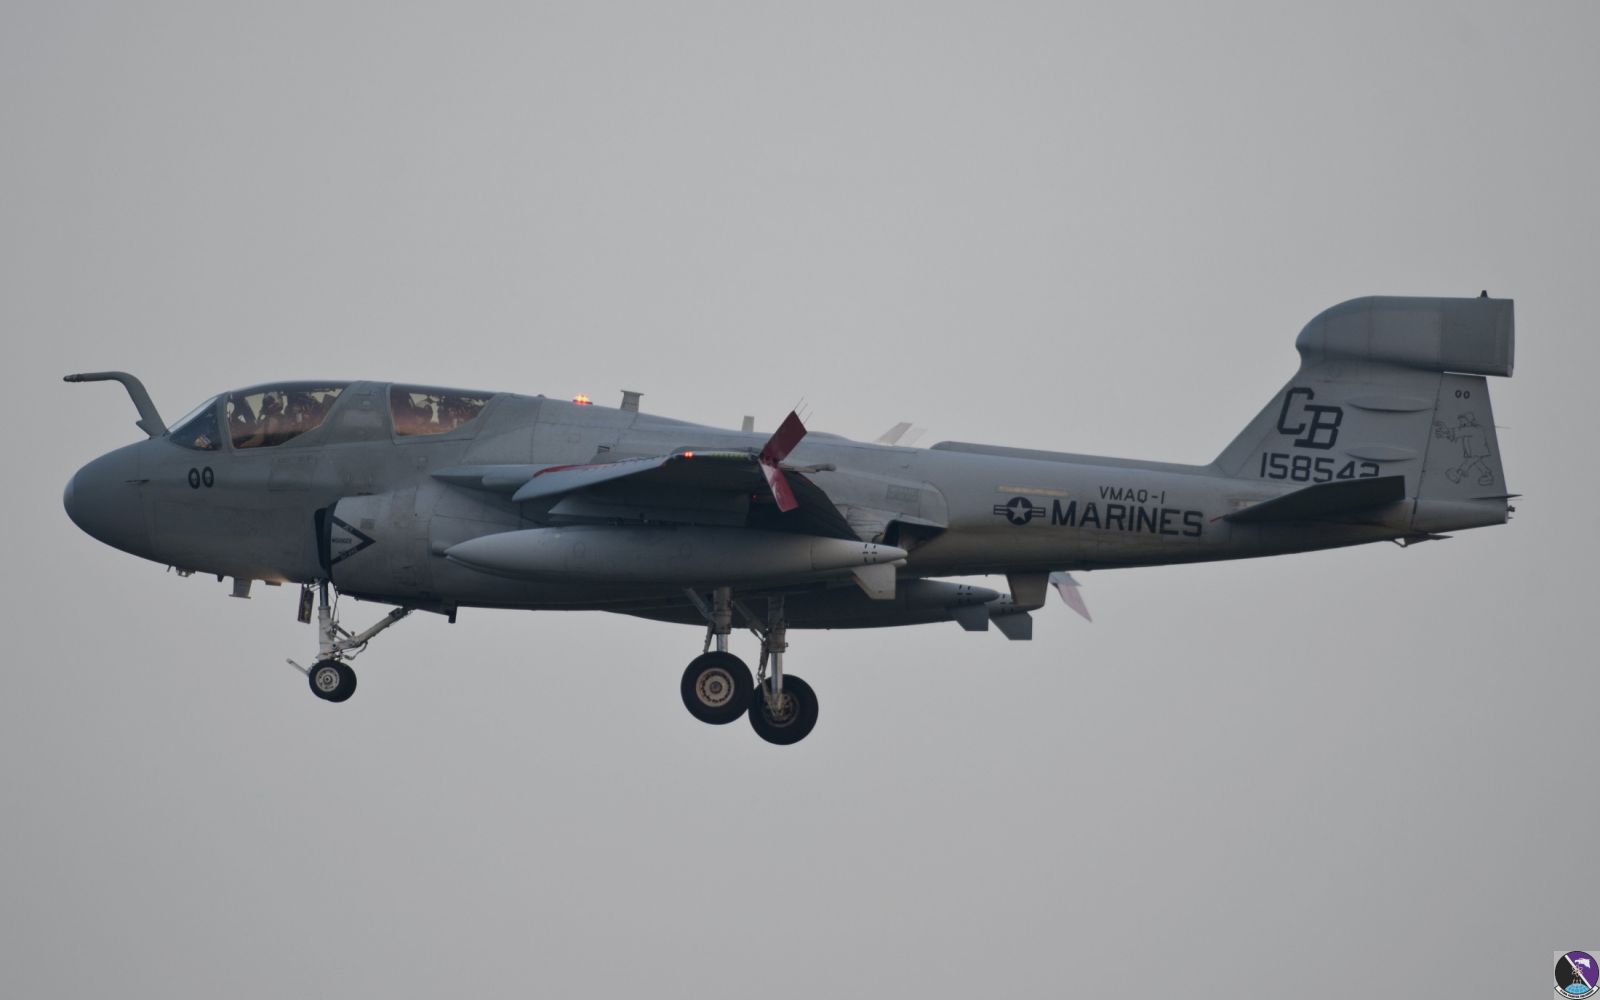 aviano september 10  2011 trend31 ea 6b 158542 00  cb  vmaq 1 mcas cherry point  nc banshee come from homebase for deployment